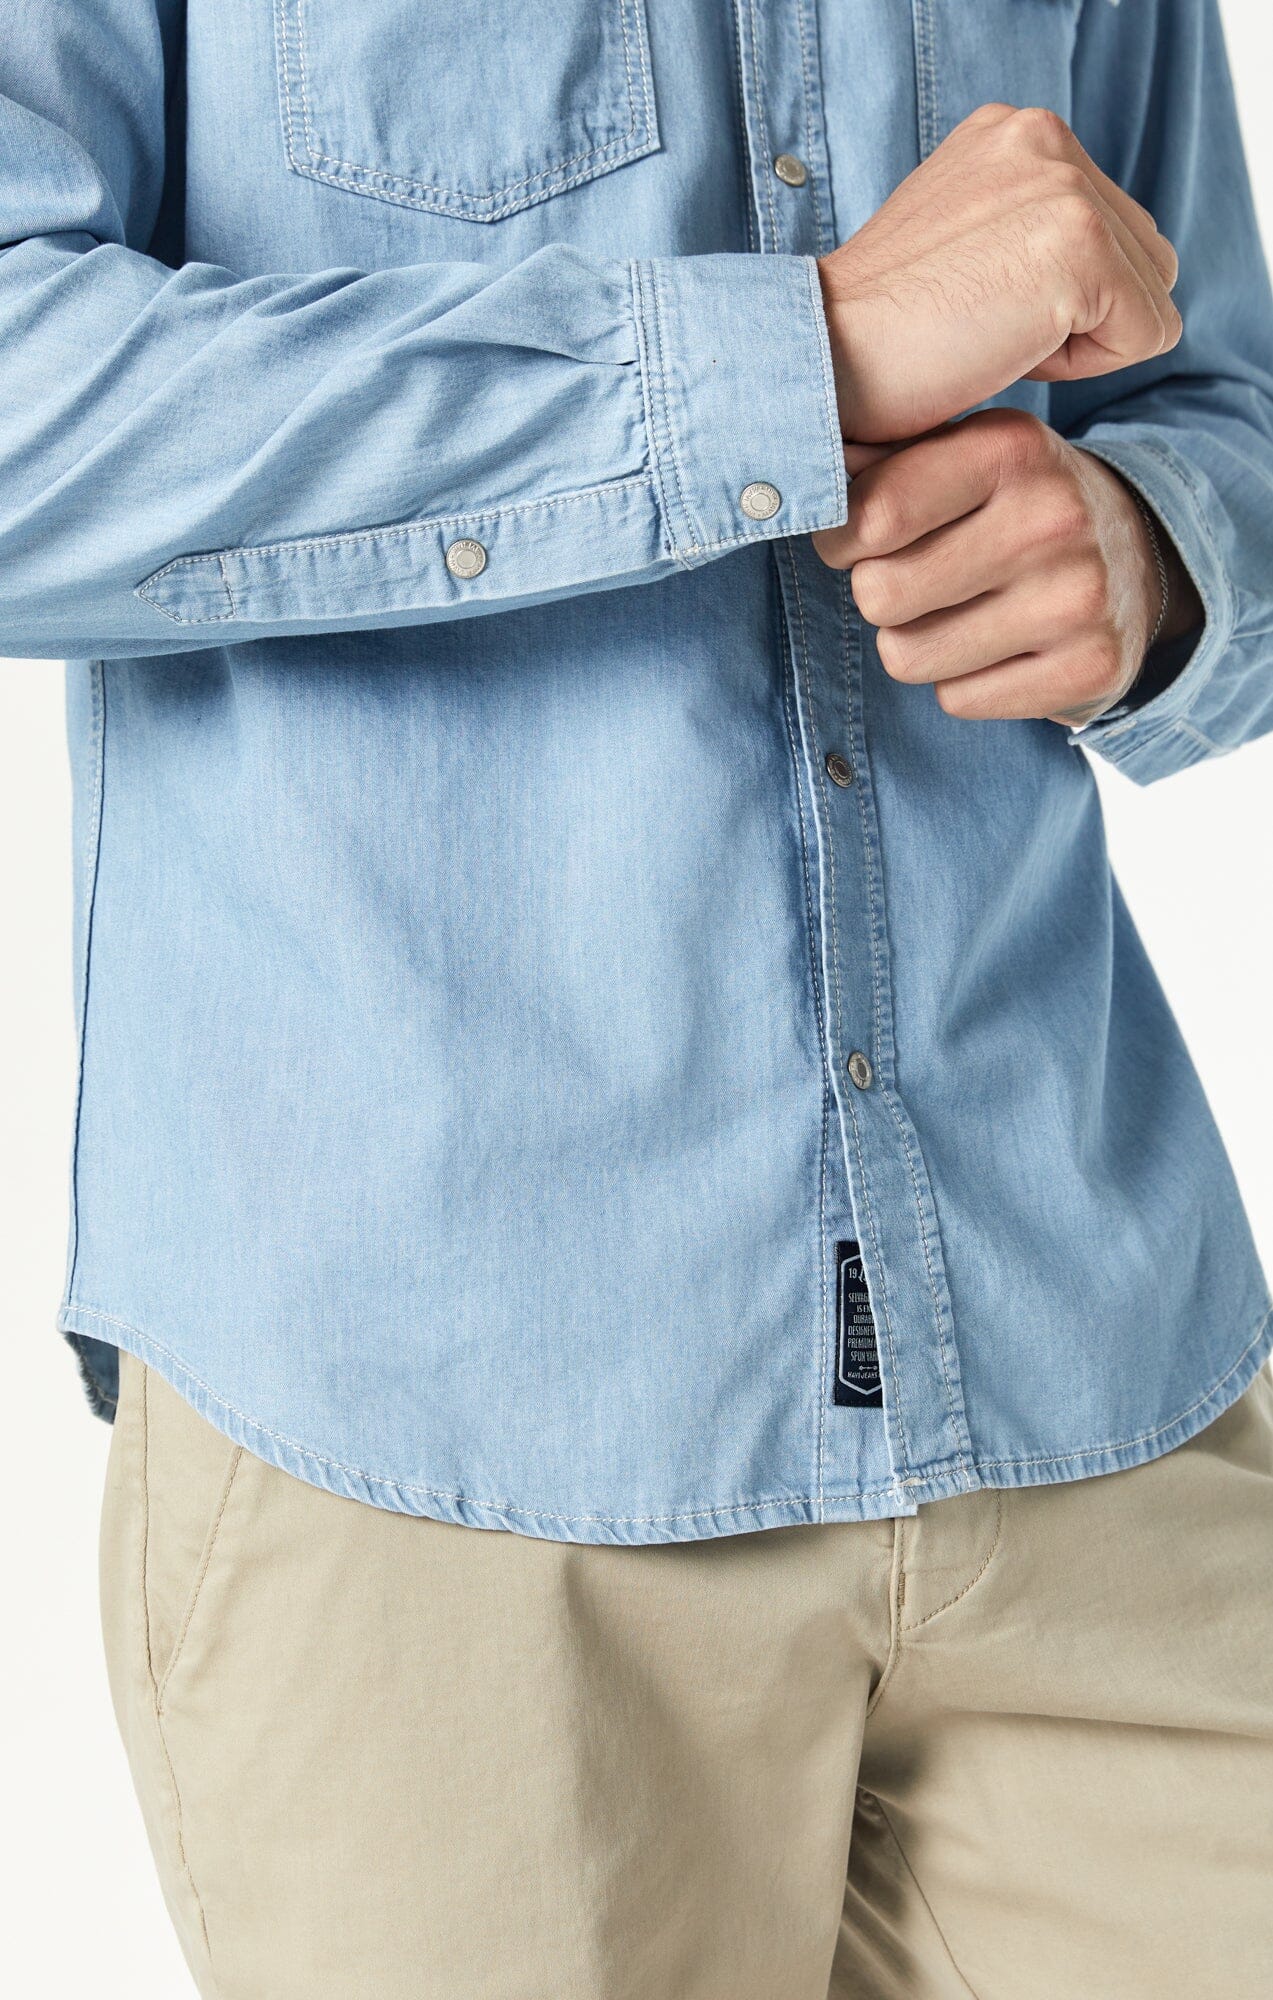 The Ledge Men's Denim Shirt in Sun Bleached Chambray | Taylor Stitch